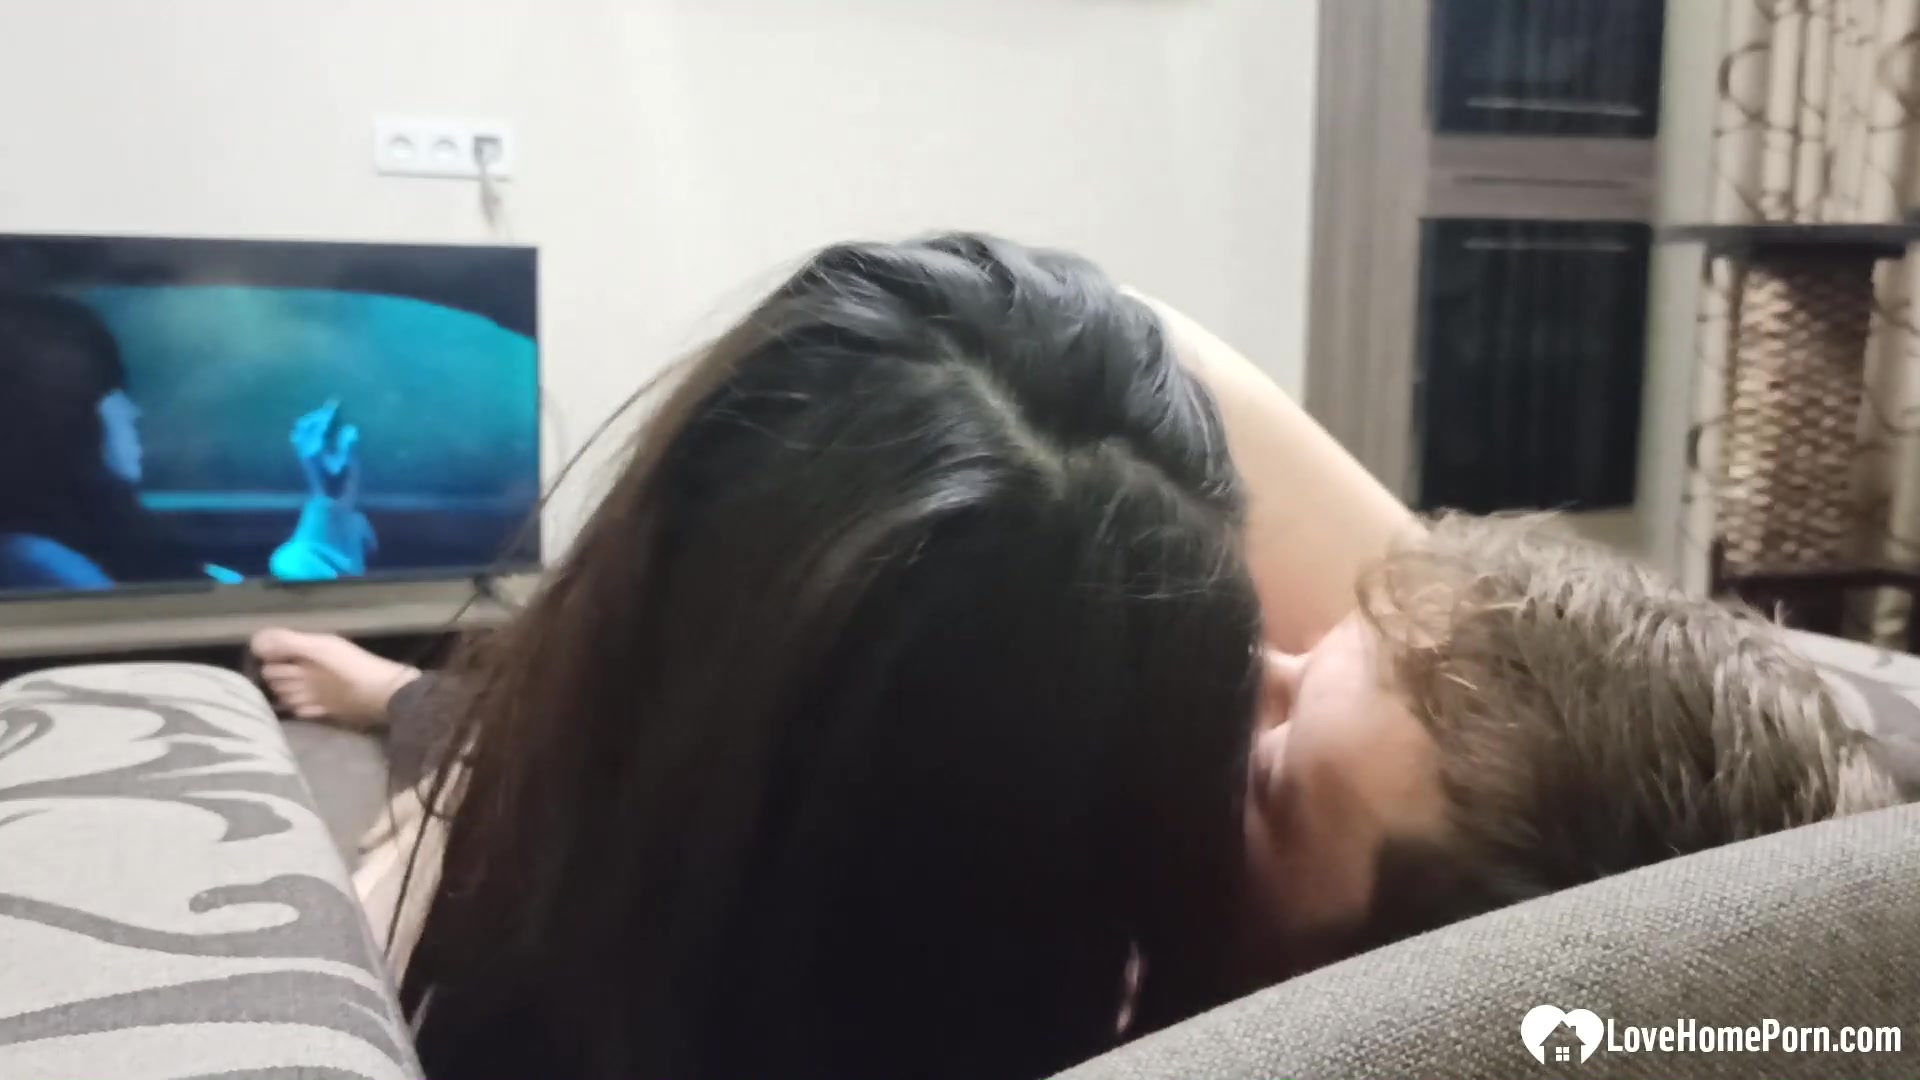 Stepsister loves taking care of his hard cock